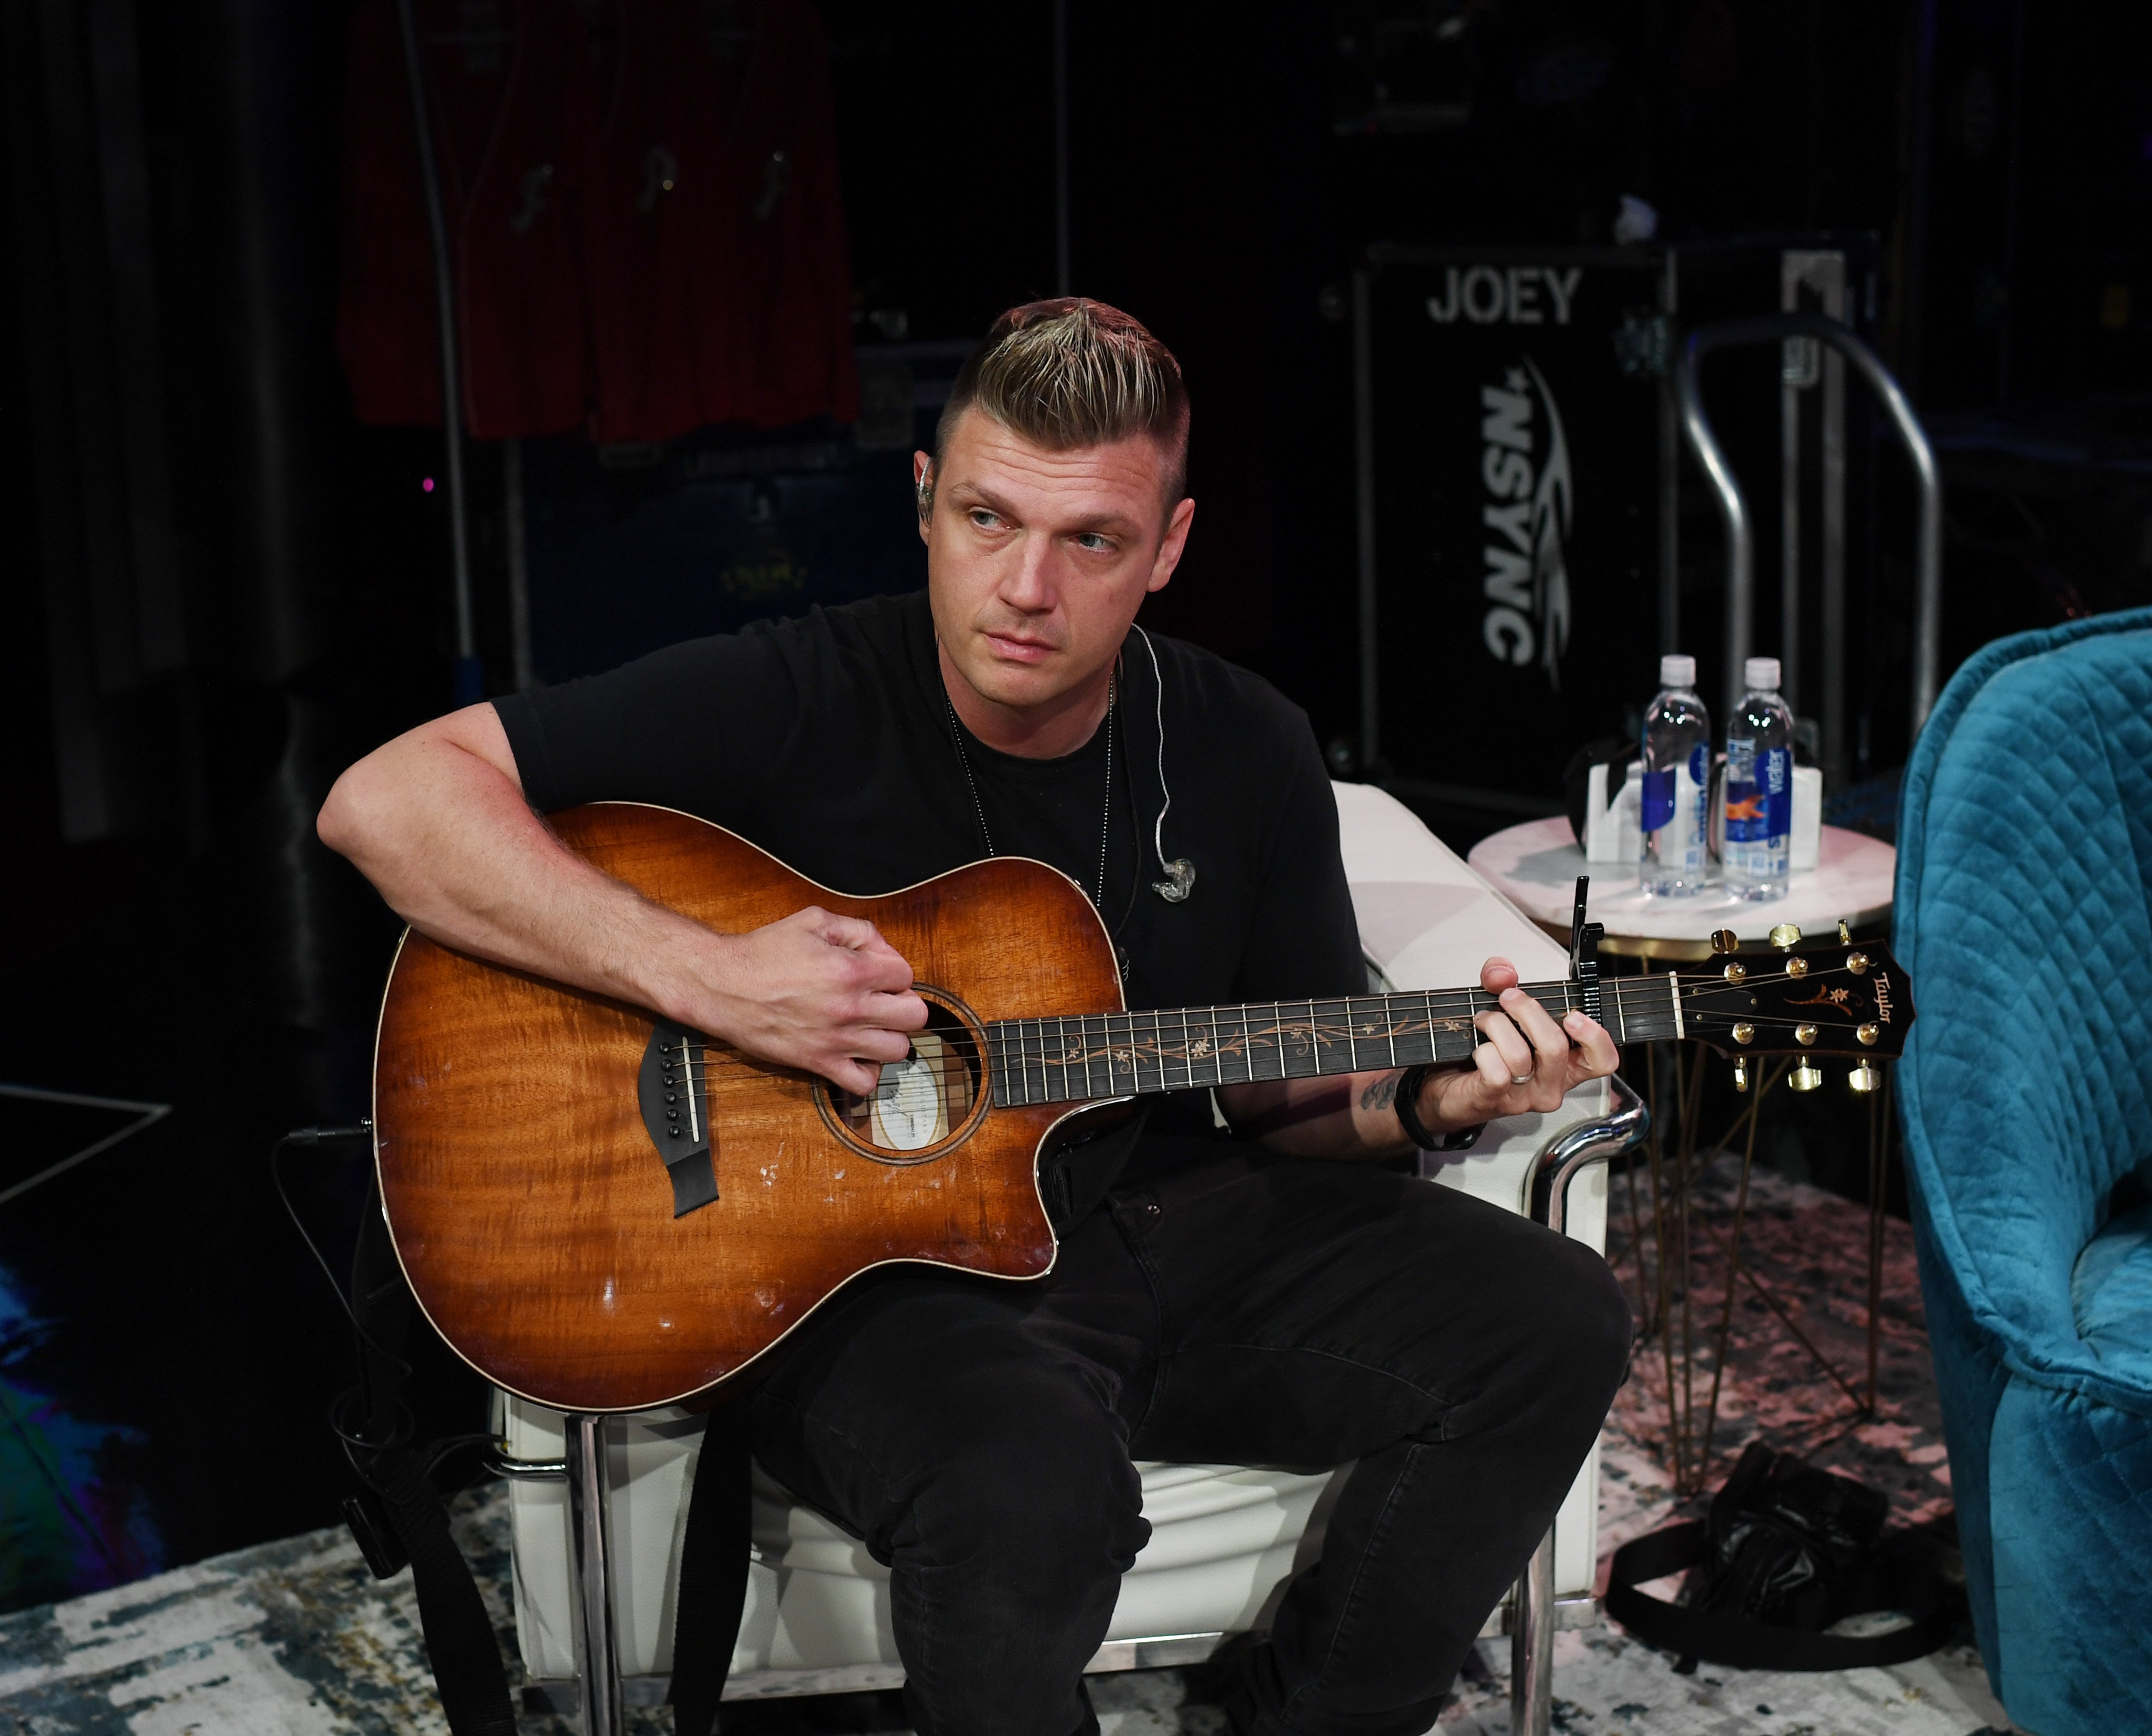 Nick Carter performs at the Venetian Resort on August 19, 2021, in Las Vegas, Nevada | Source: Getty Images